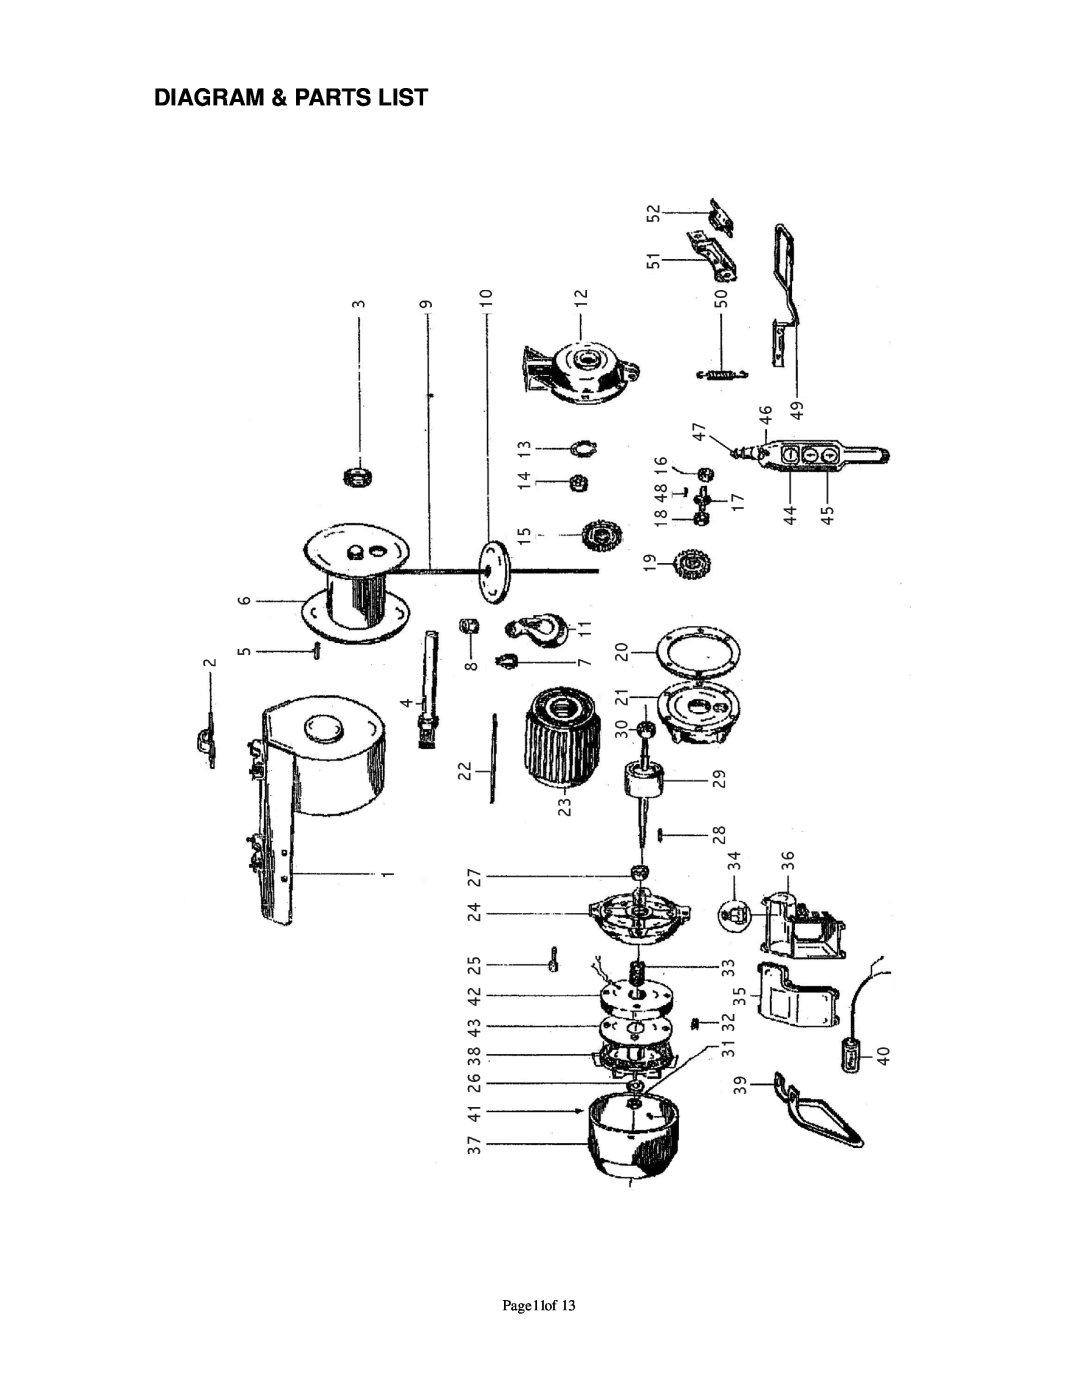 Northern Industrial Tools 142264 owner manual Diagram & Parts List, Page11of 